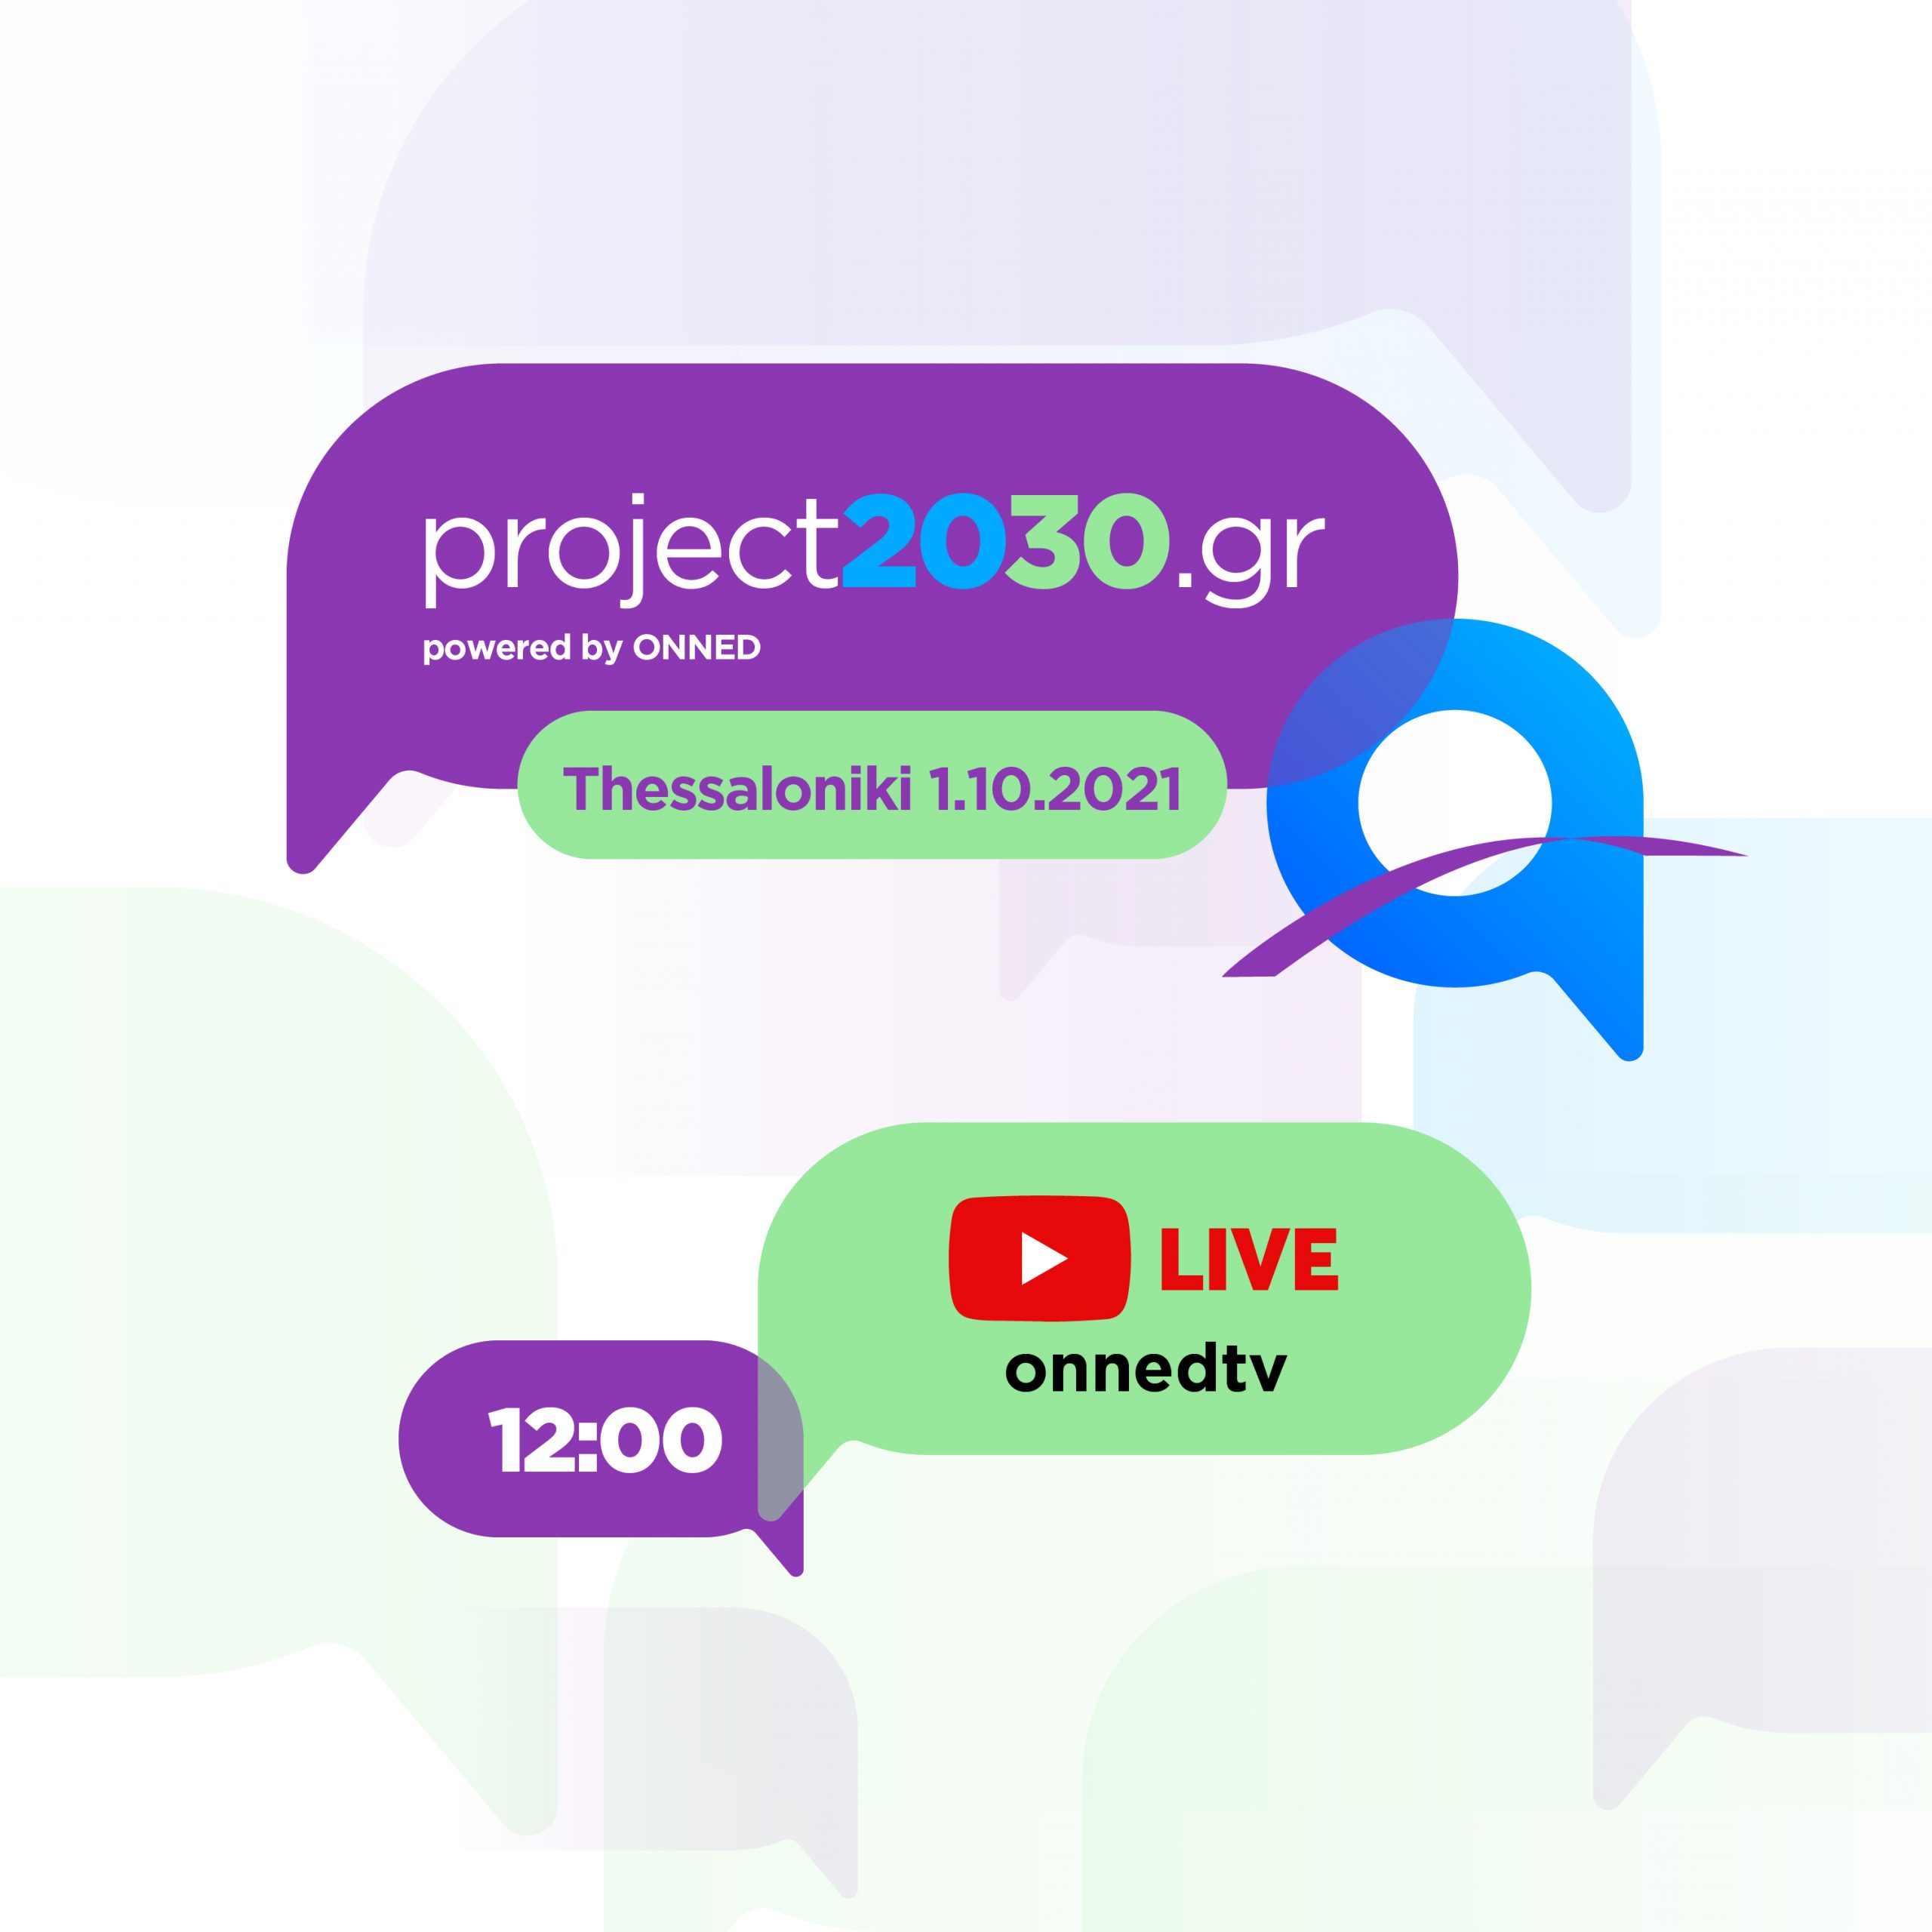 Project #2030gr Youth Forum powered by ΟΝΝΕΔ @Thessaloniki